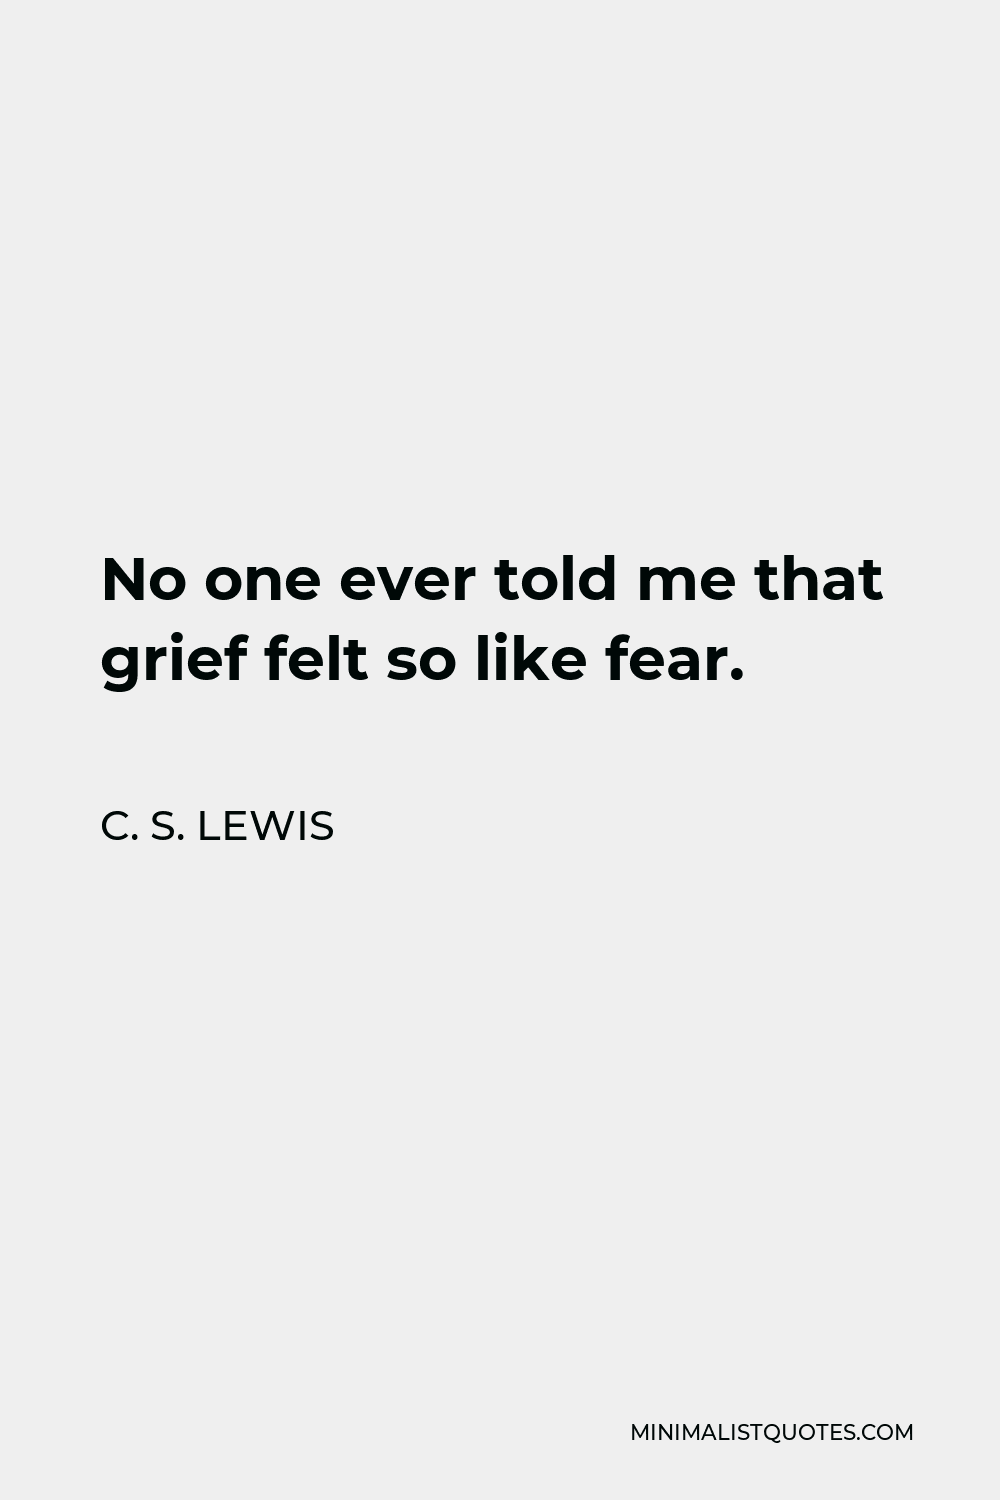 C. S. Lewis Quote - No one ever told me that grief felt so like fear.